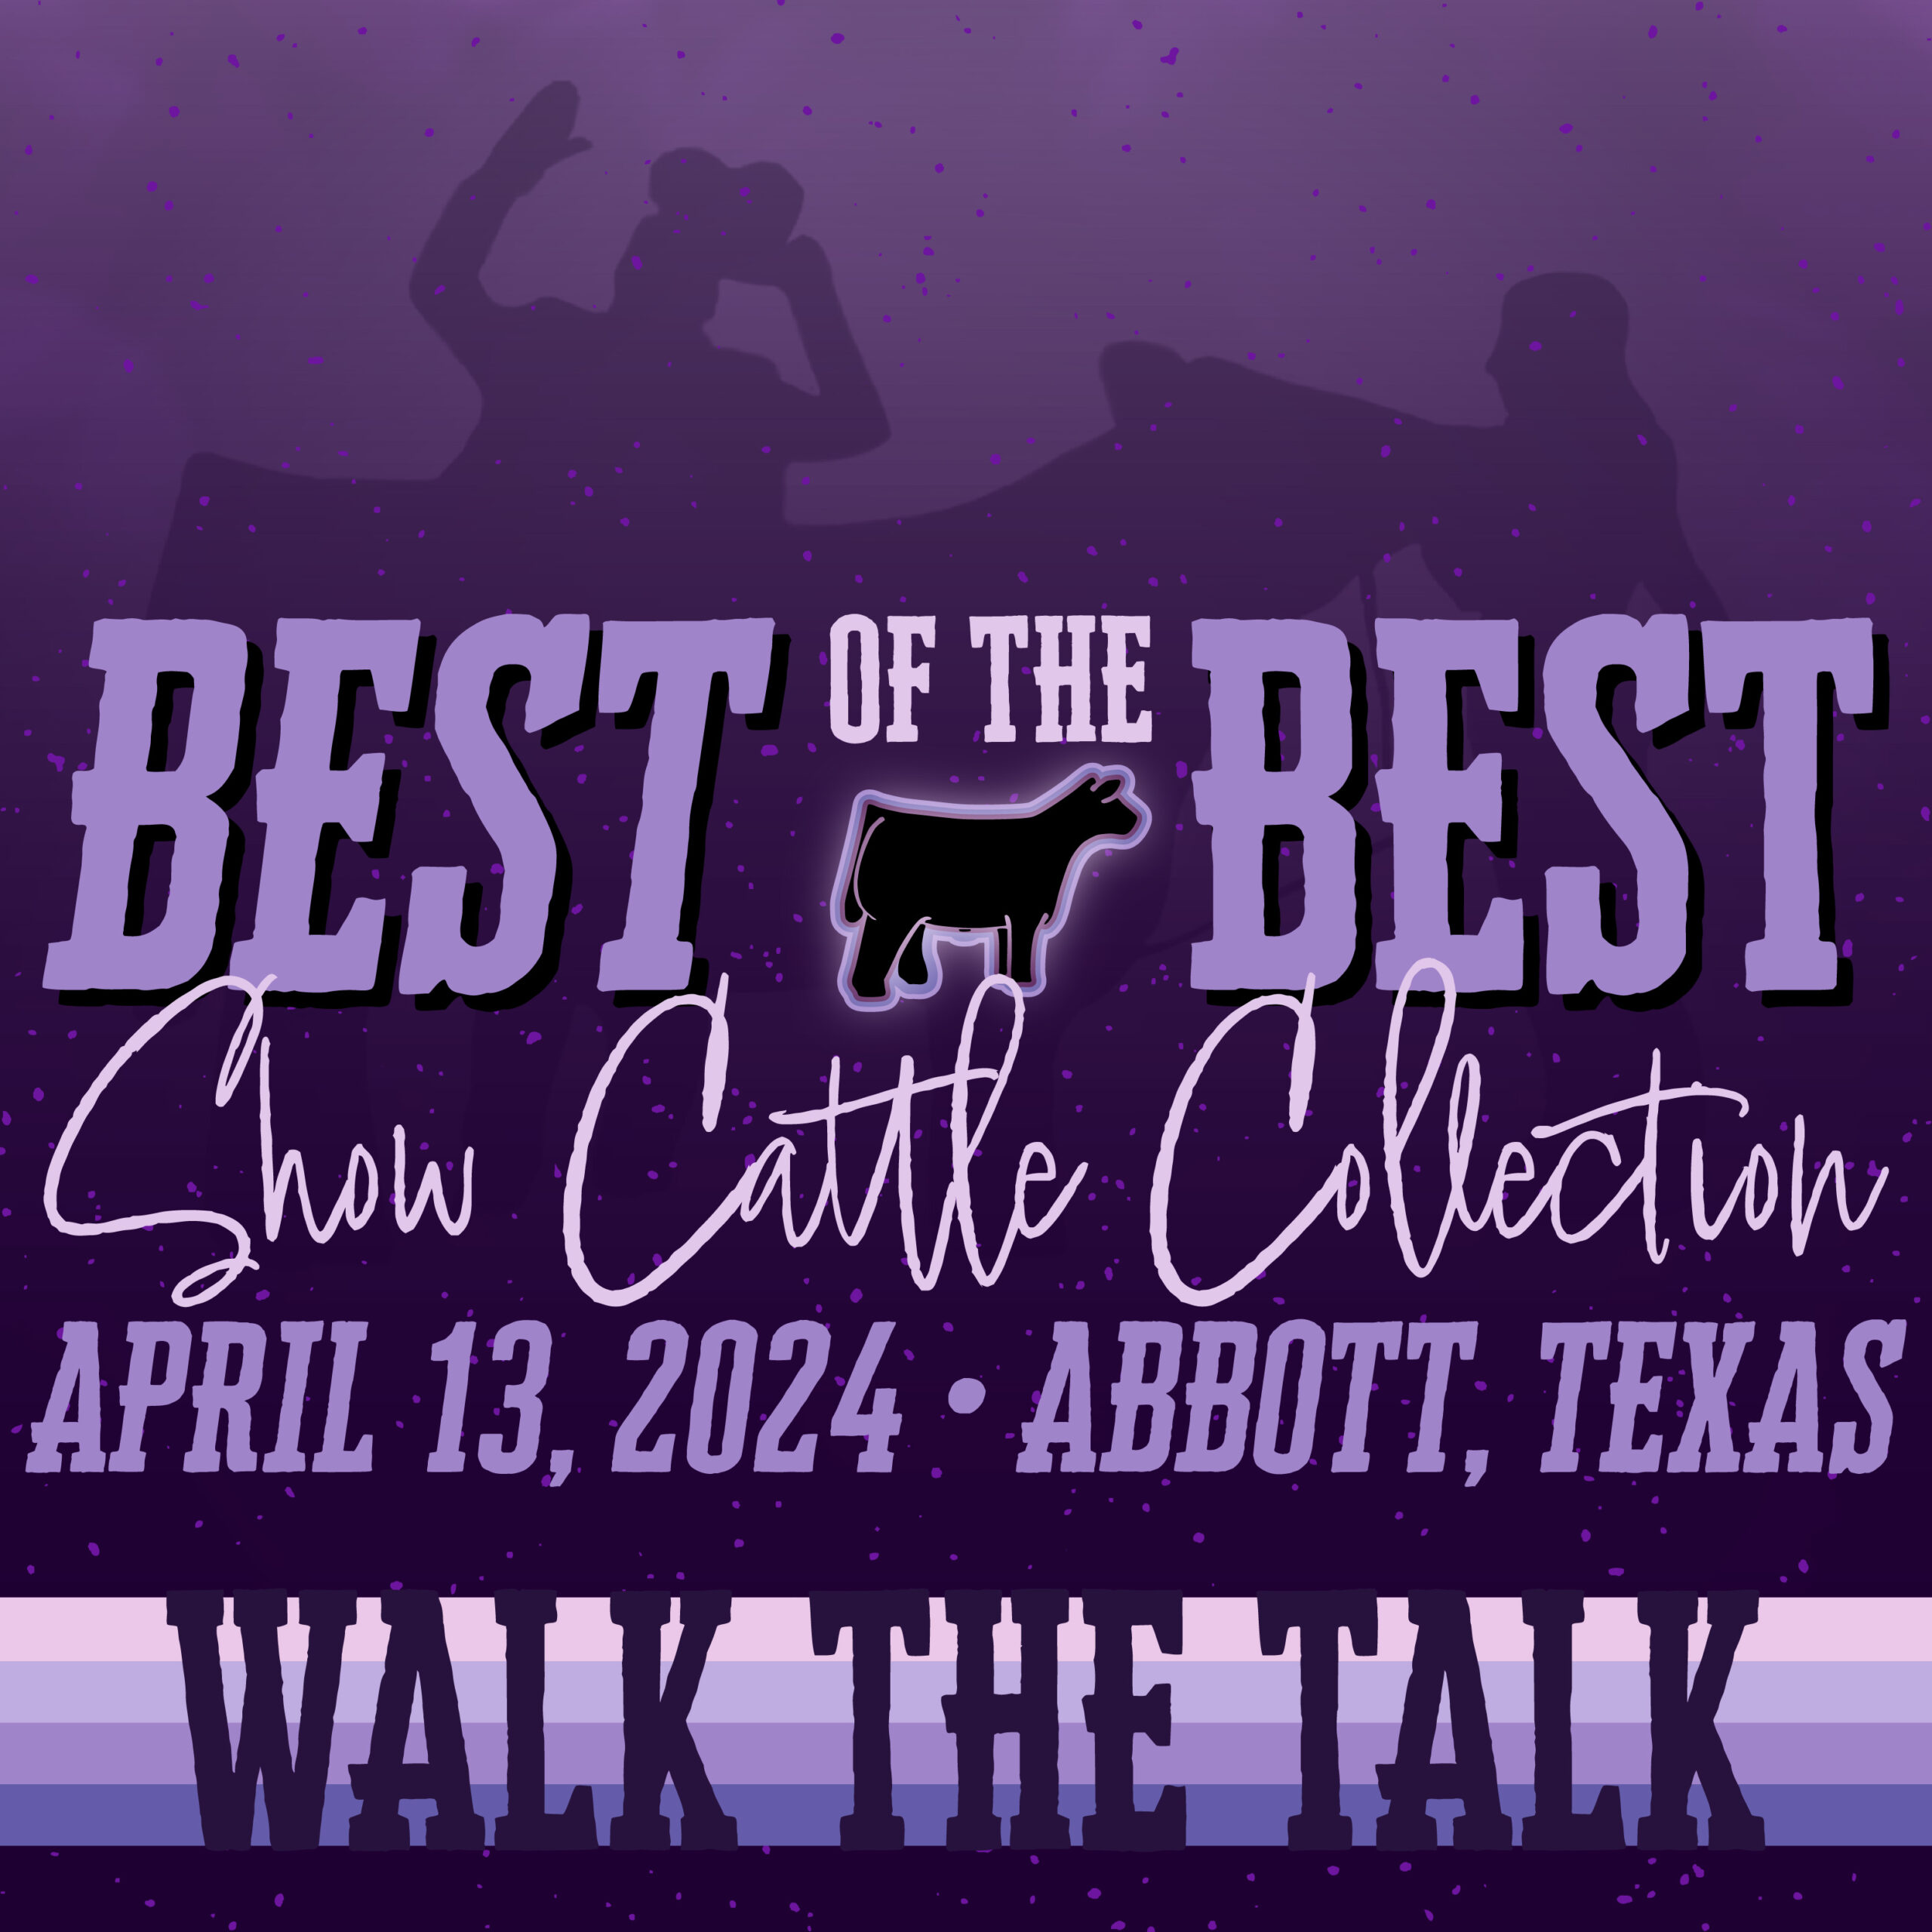 Best of the Best, Day show cattle collection flyer